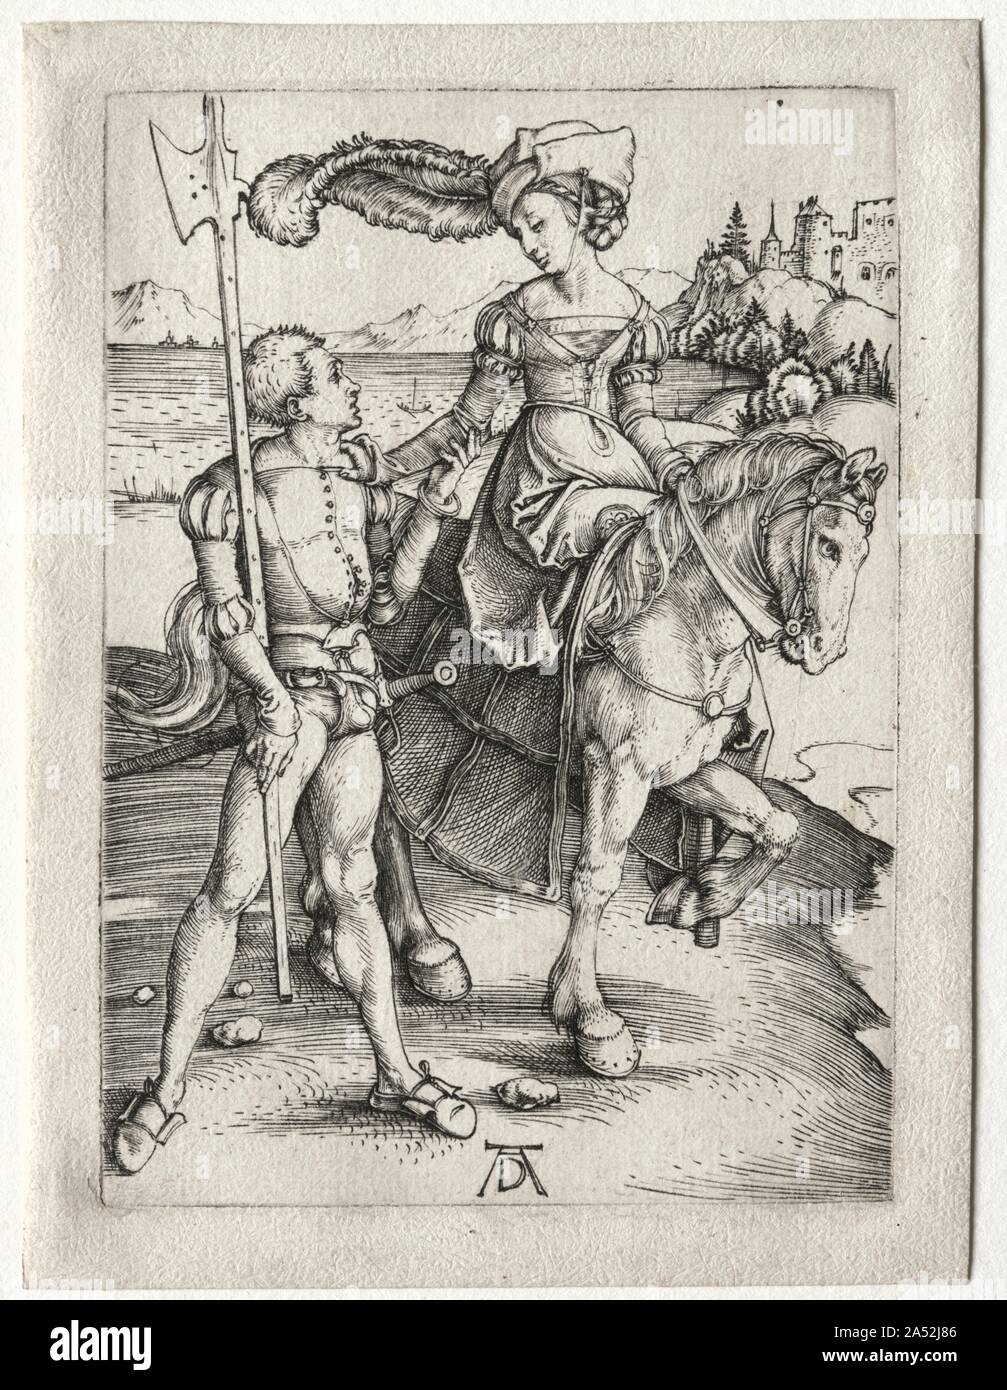 The Lady Riding and the Landsknecht, c. 1497. At first the subject of this early print appears to be simple courtly love; in it a noblewoman and infantryman share a private moment of farewell. However, a deeper reading of the image suggests underlying themes related to the power of women. Although the young man&#x2019;s stance and weaponry establish his masculinity, the woman&#x2019;s higher social status and physical position on horseback allude to her authority over him. Further, the hat she wears belongs to her lover&#x2019;s costume, not to contemporary women&#x2019;s fashion. Her appropri Stock Photo